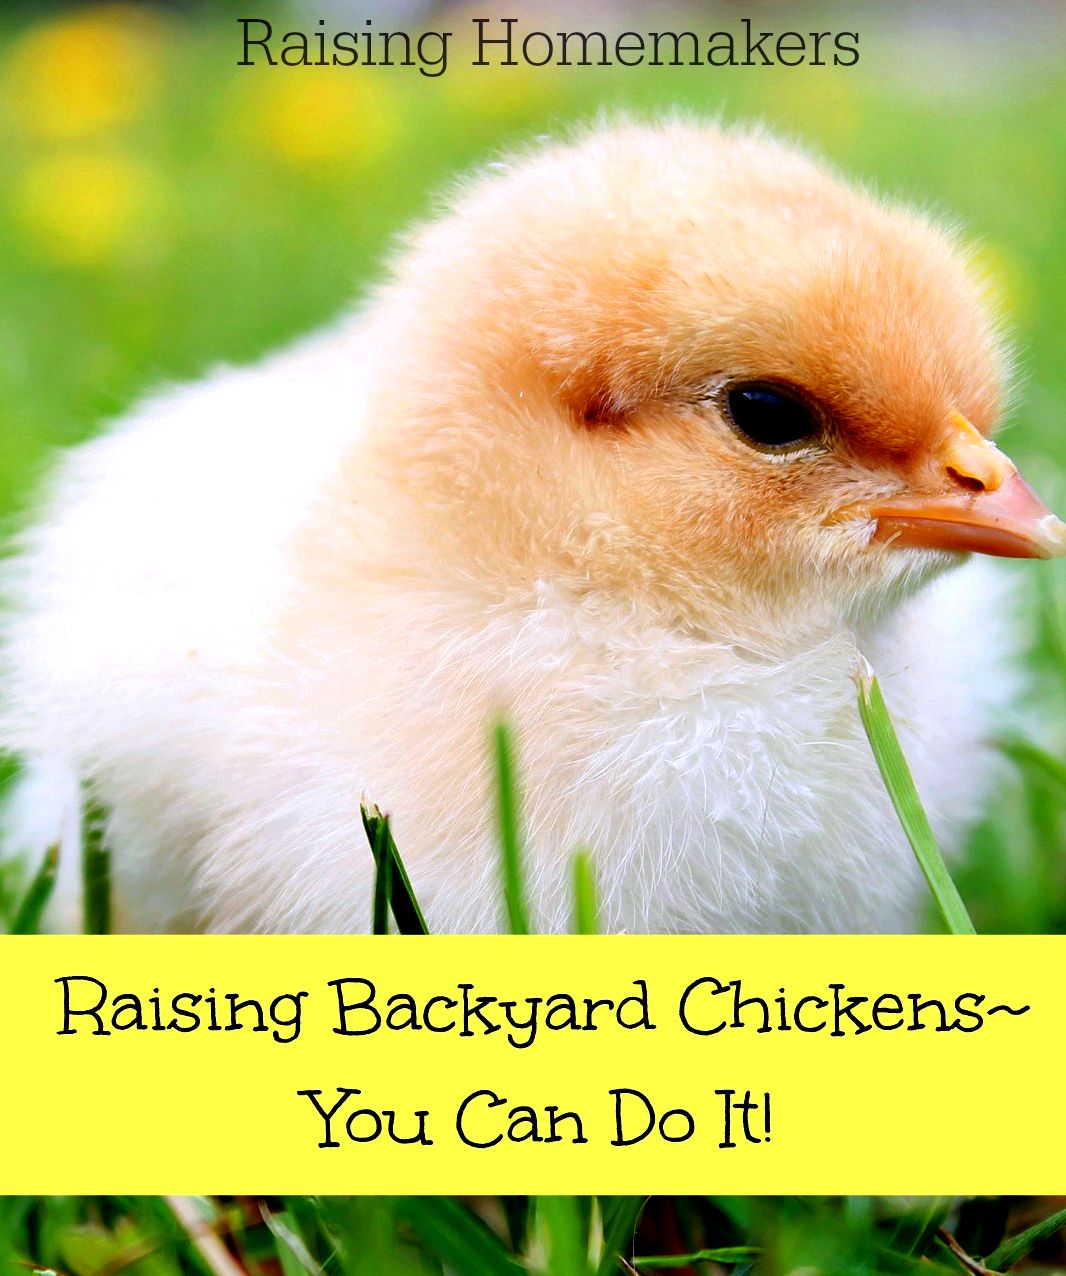 How you can raise chickens - about raising organic, backyard chickens the duration of